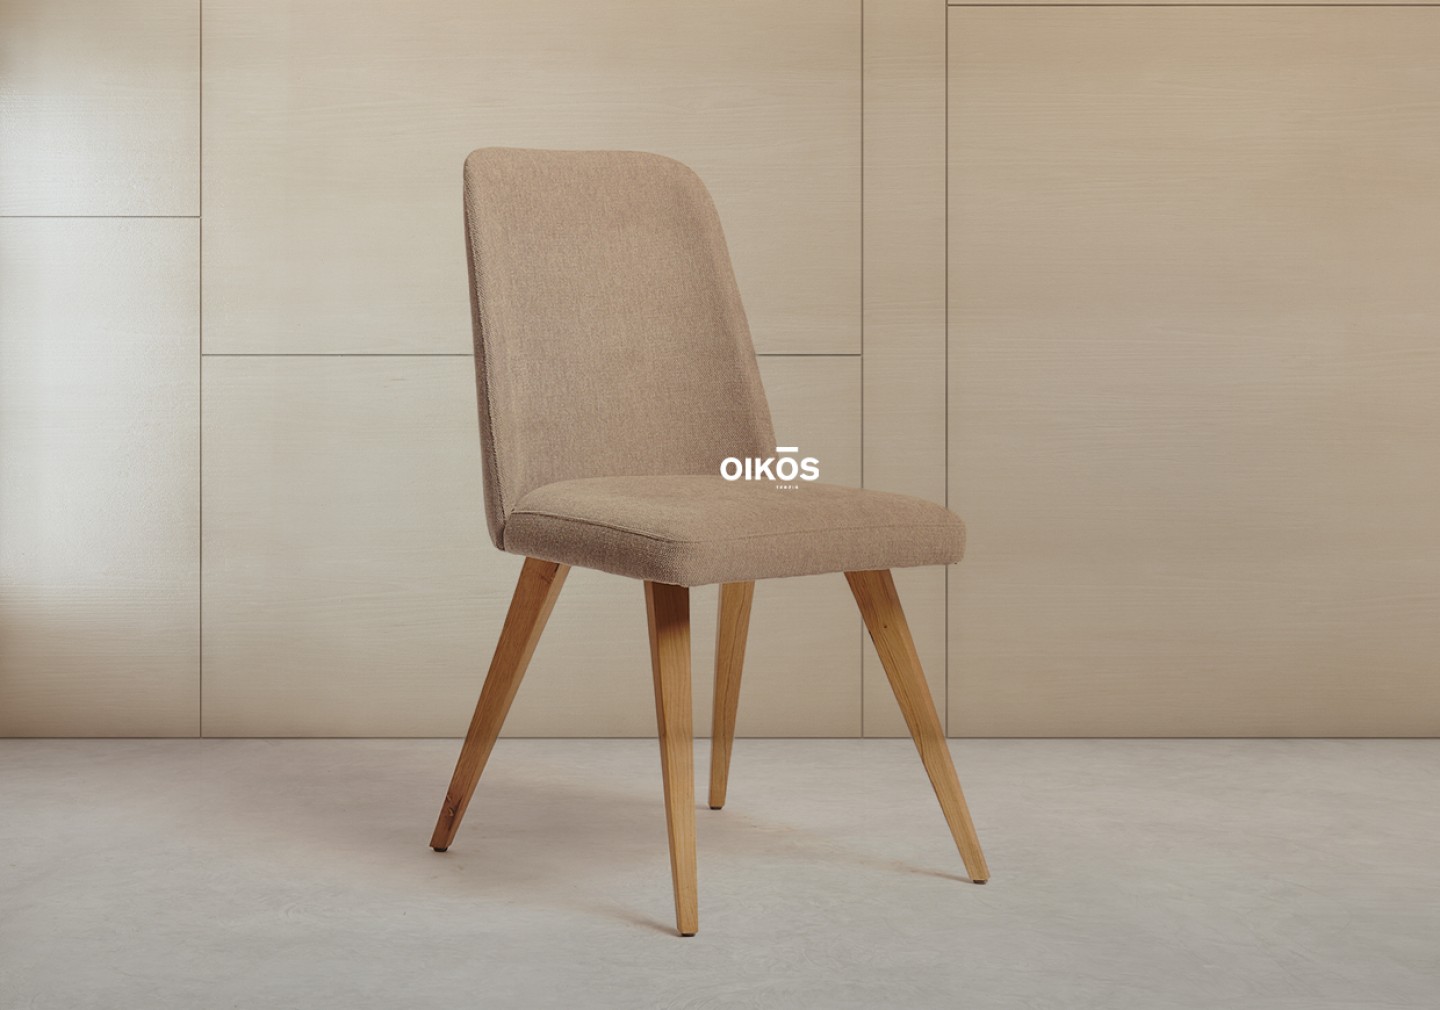 THE ROBIN DINING CHAIR